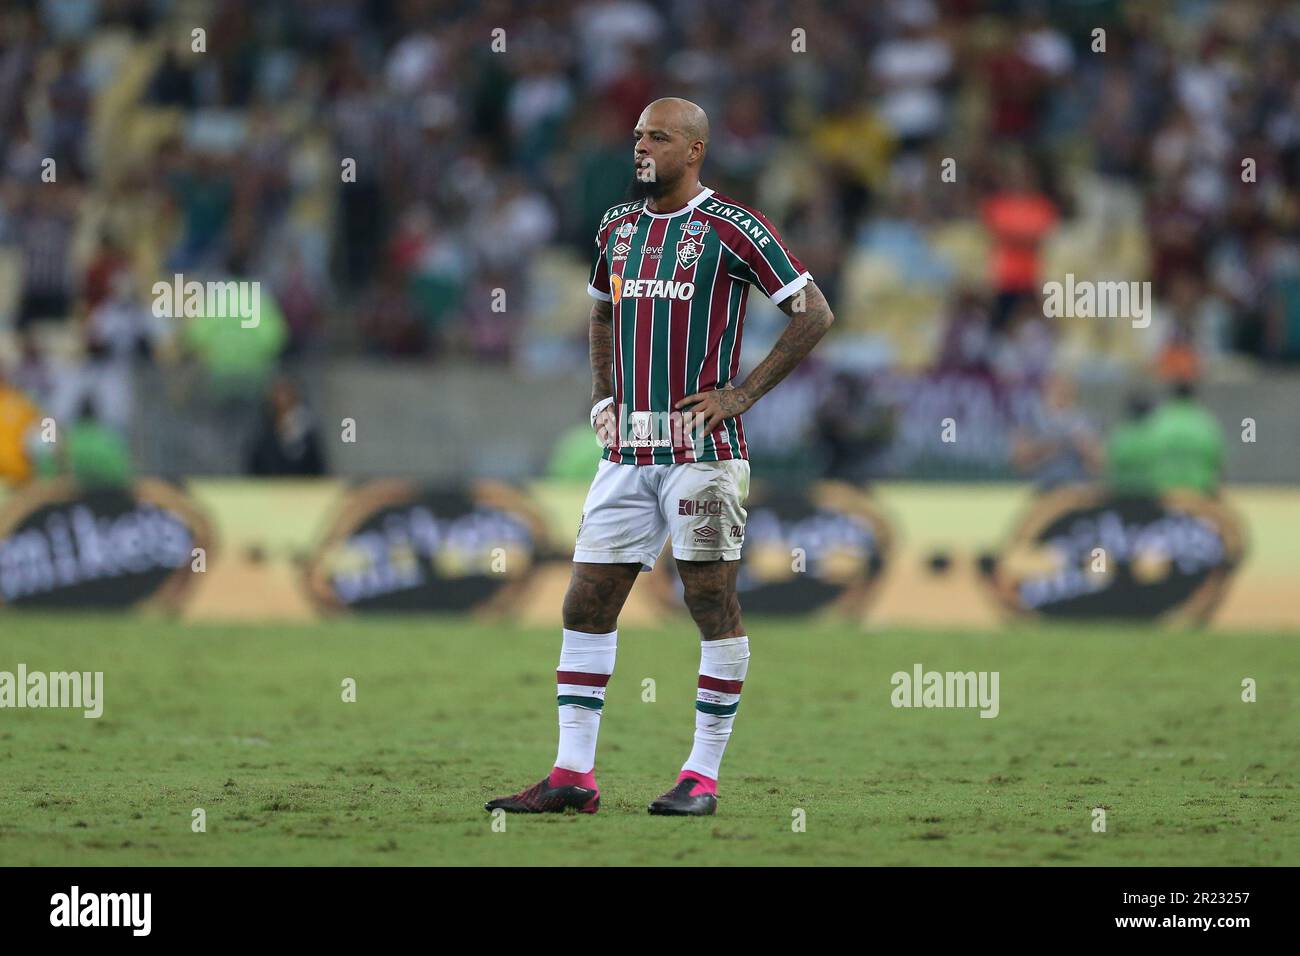 Rio De Janeiro, Brazil. 16th May, 2023. Maracana Stadium Felipe Melo of Fluminense, leaves the pitch after being expelled for fouling Gabriel Barbosa of Flamengo, during the match between Fluminense and Flamengo, for the round of 16 of the Copa do Brasil 2023, at Estadio do Maracana, this Tuesday 16. 30761 (Daniel Castelo Branco/SPP) Credit: SPP Sport Press Photo. /Alamy Live News Stock Photo